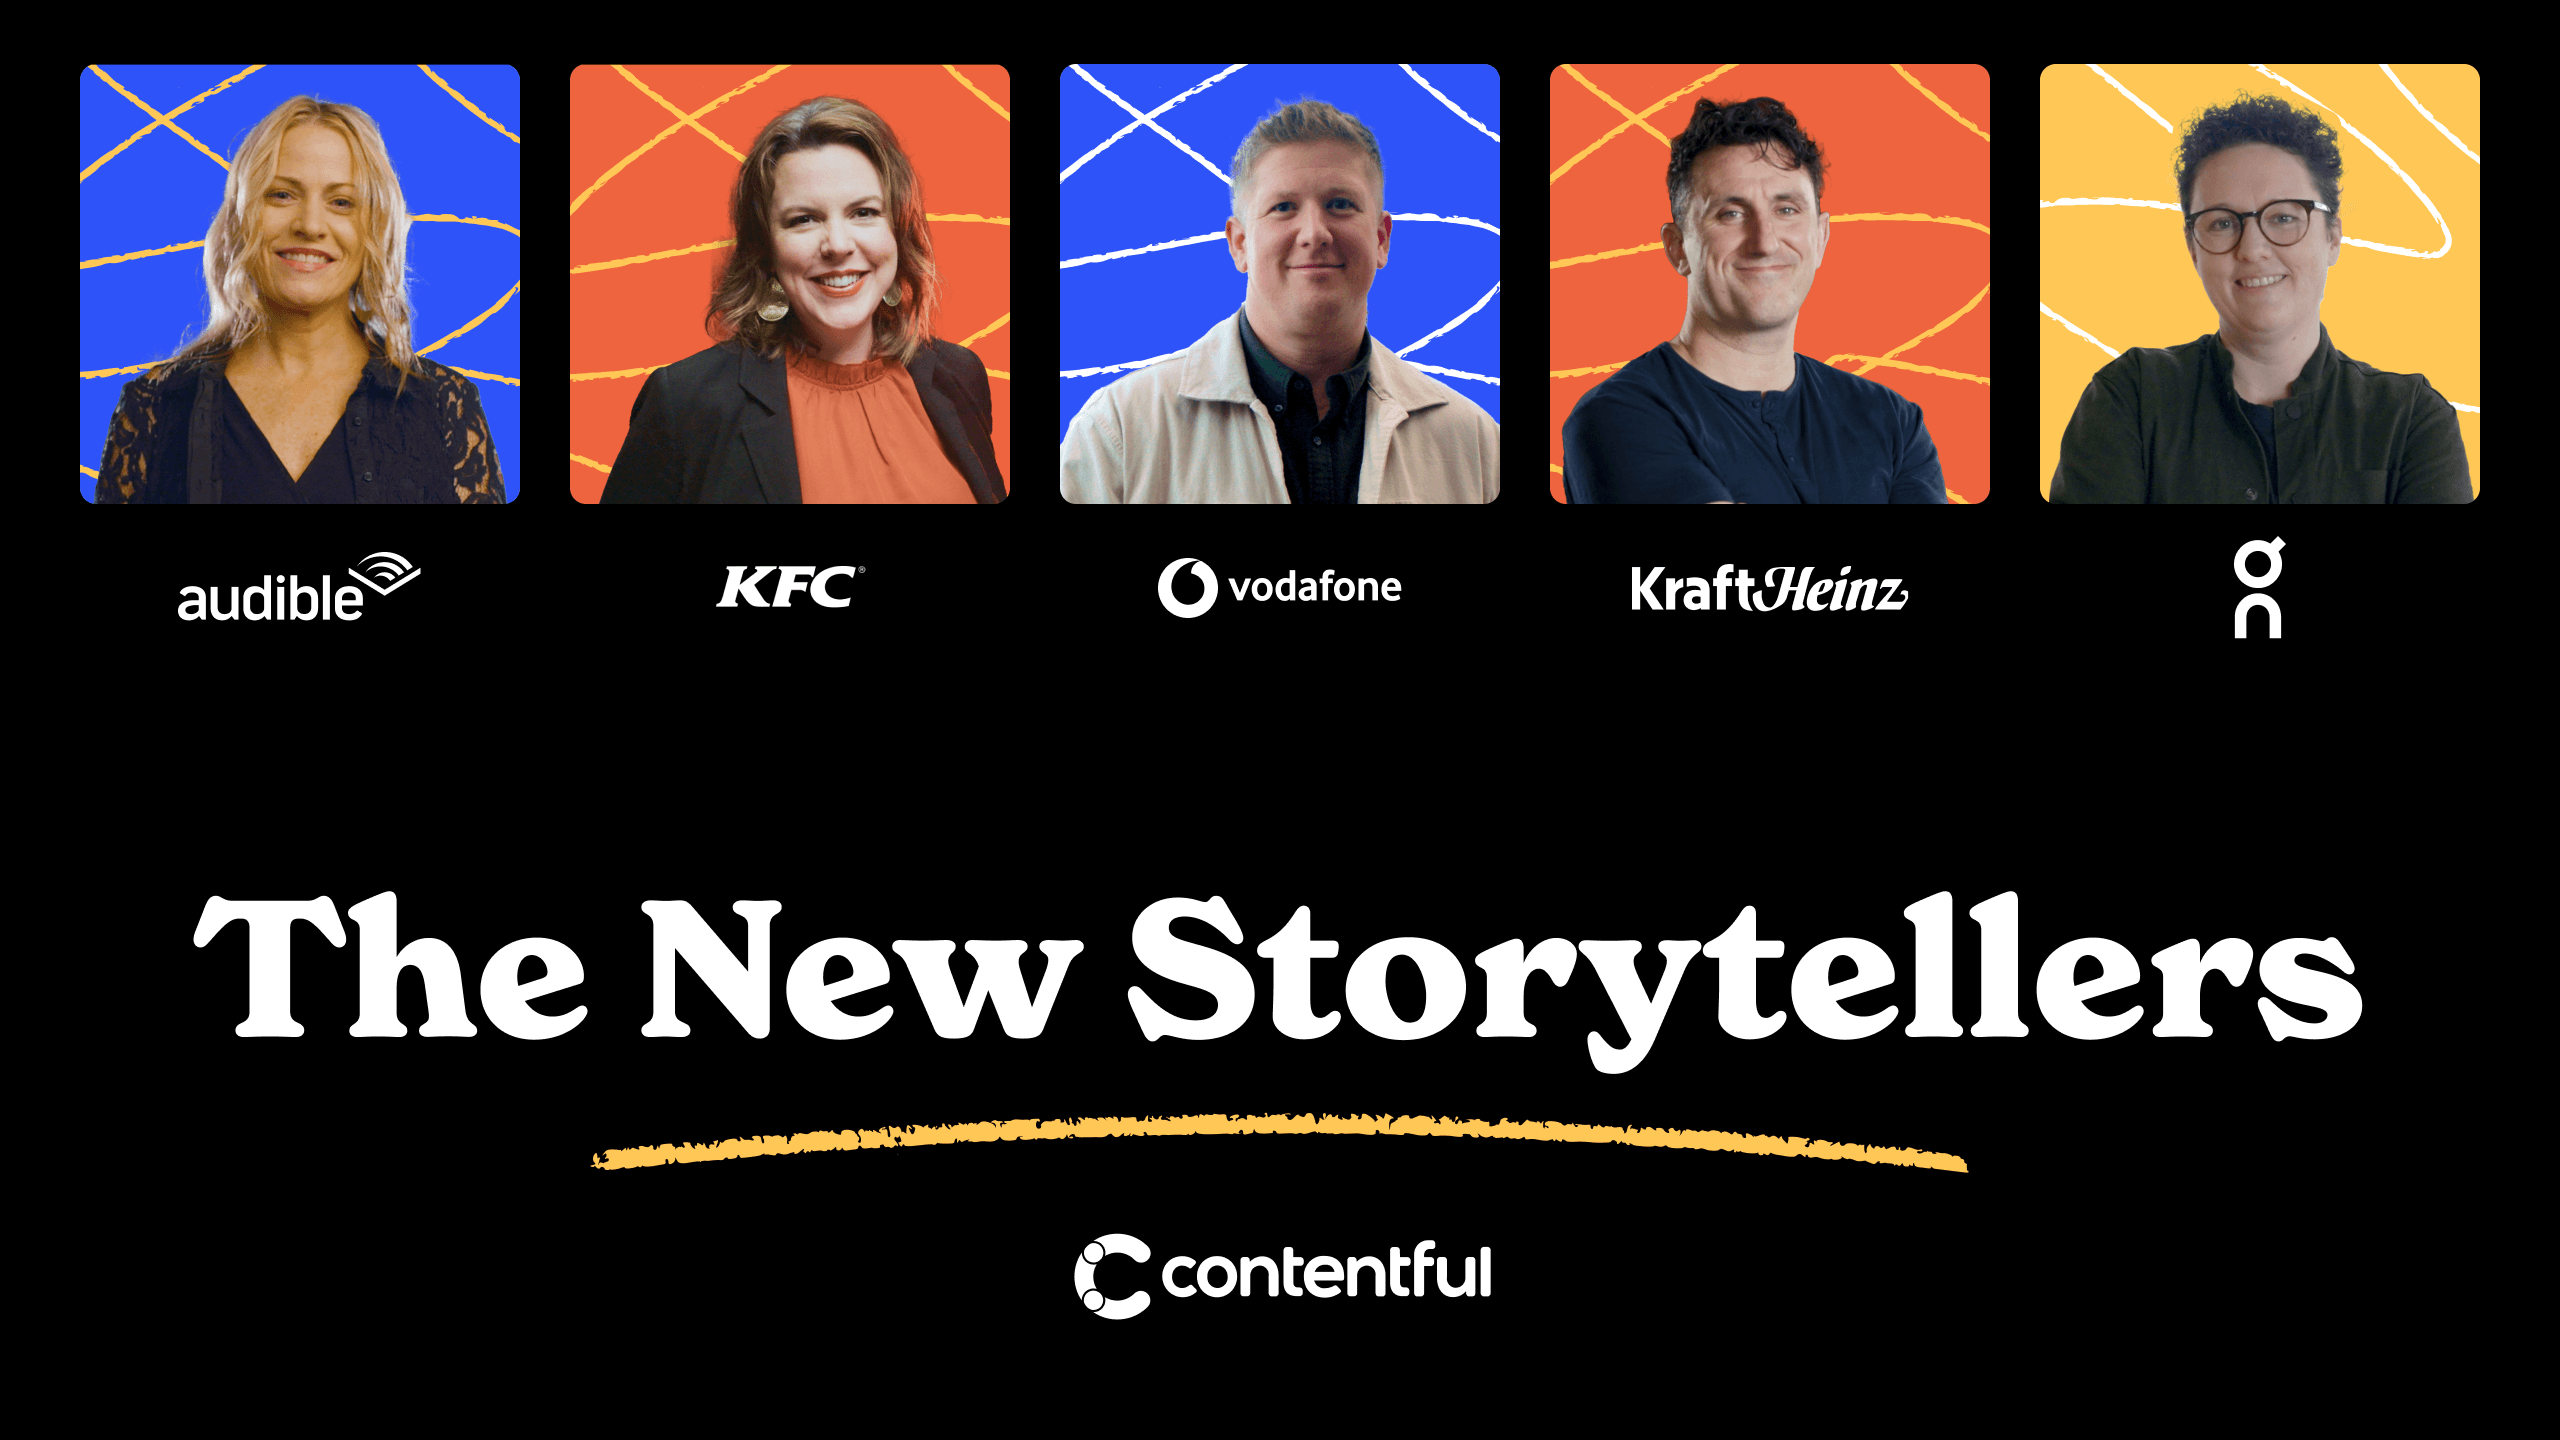 Promo for The New Storytellers series, highlighting the customer champion from each episode.